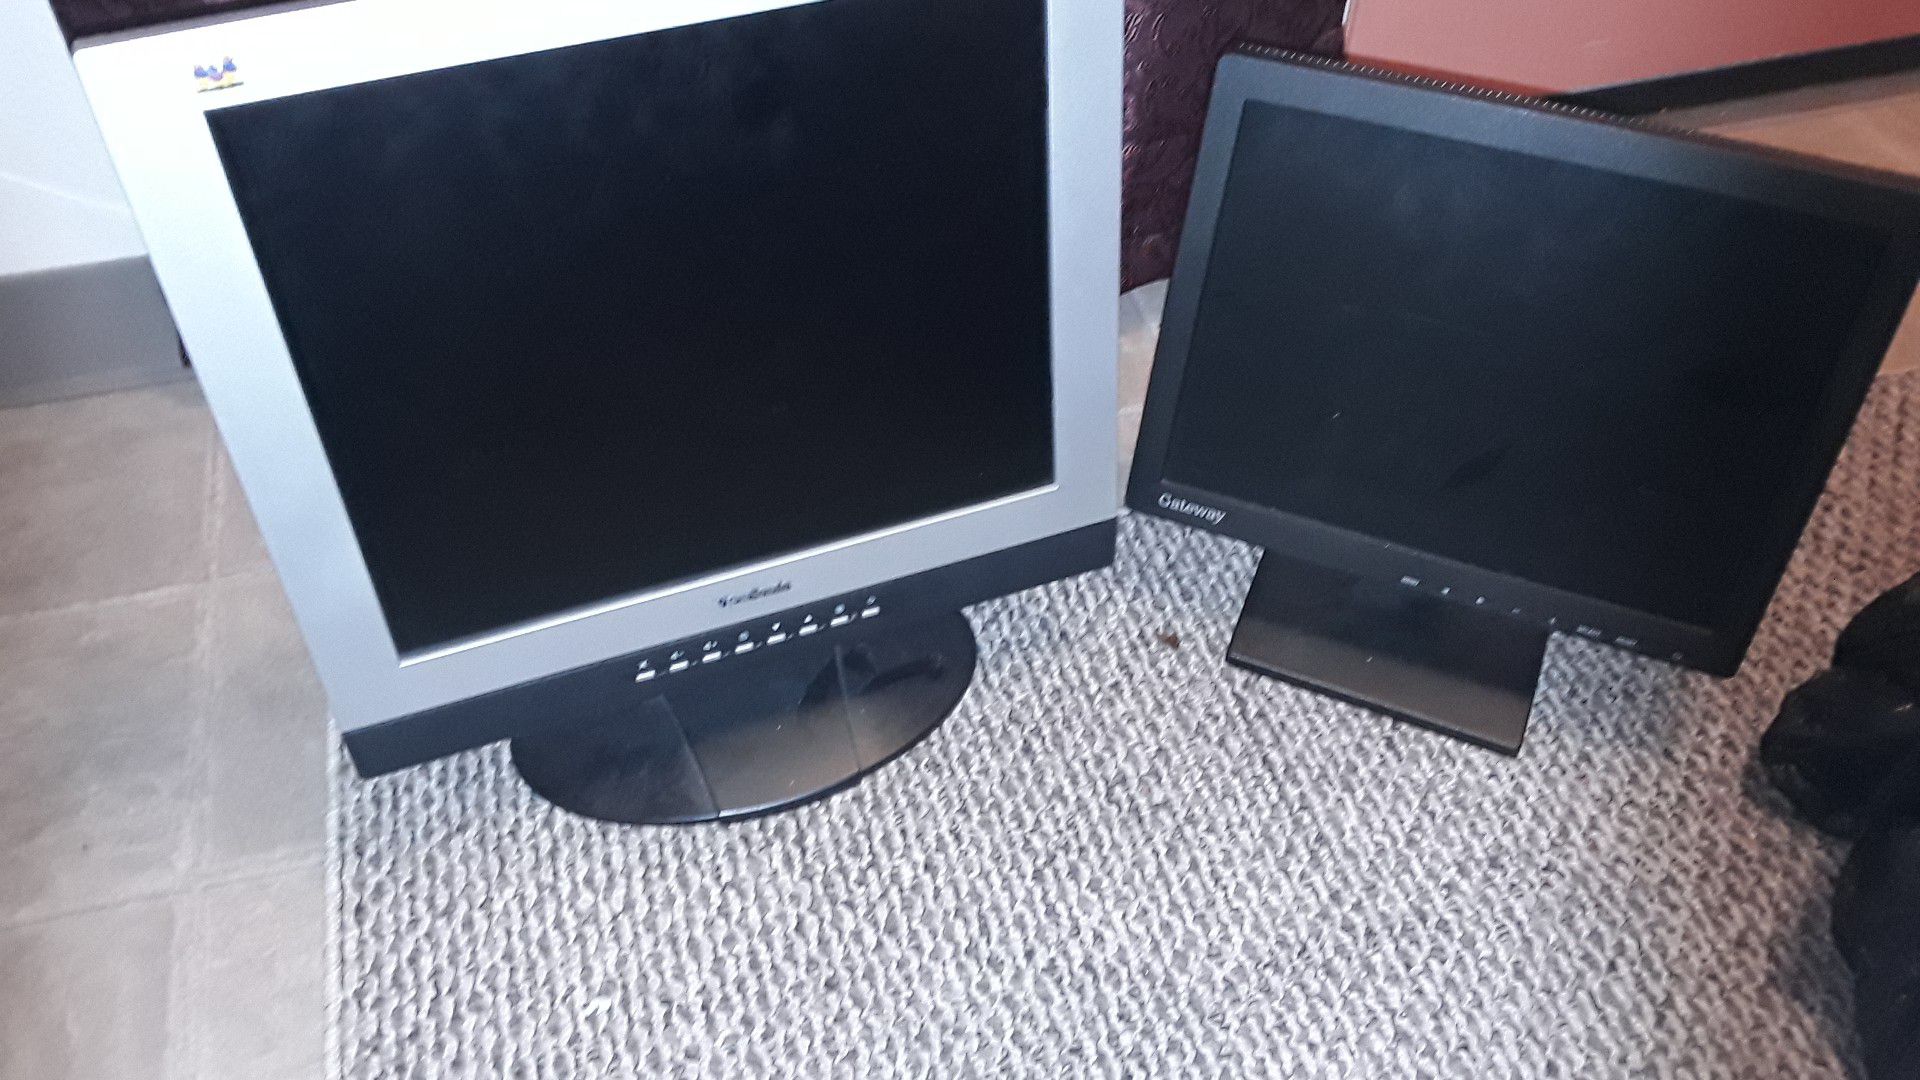 Free monitor but no cables